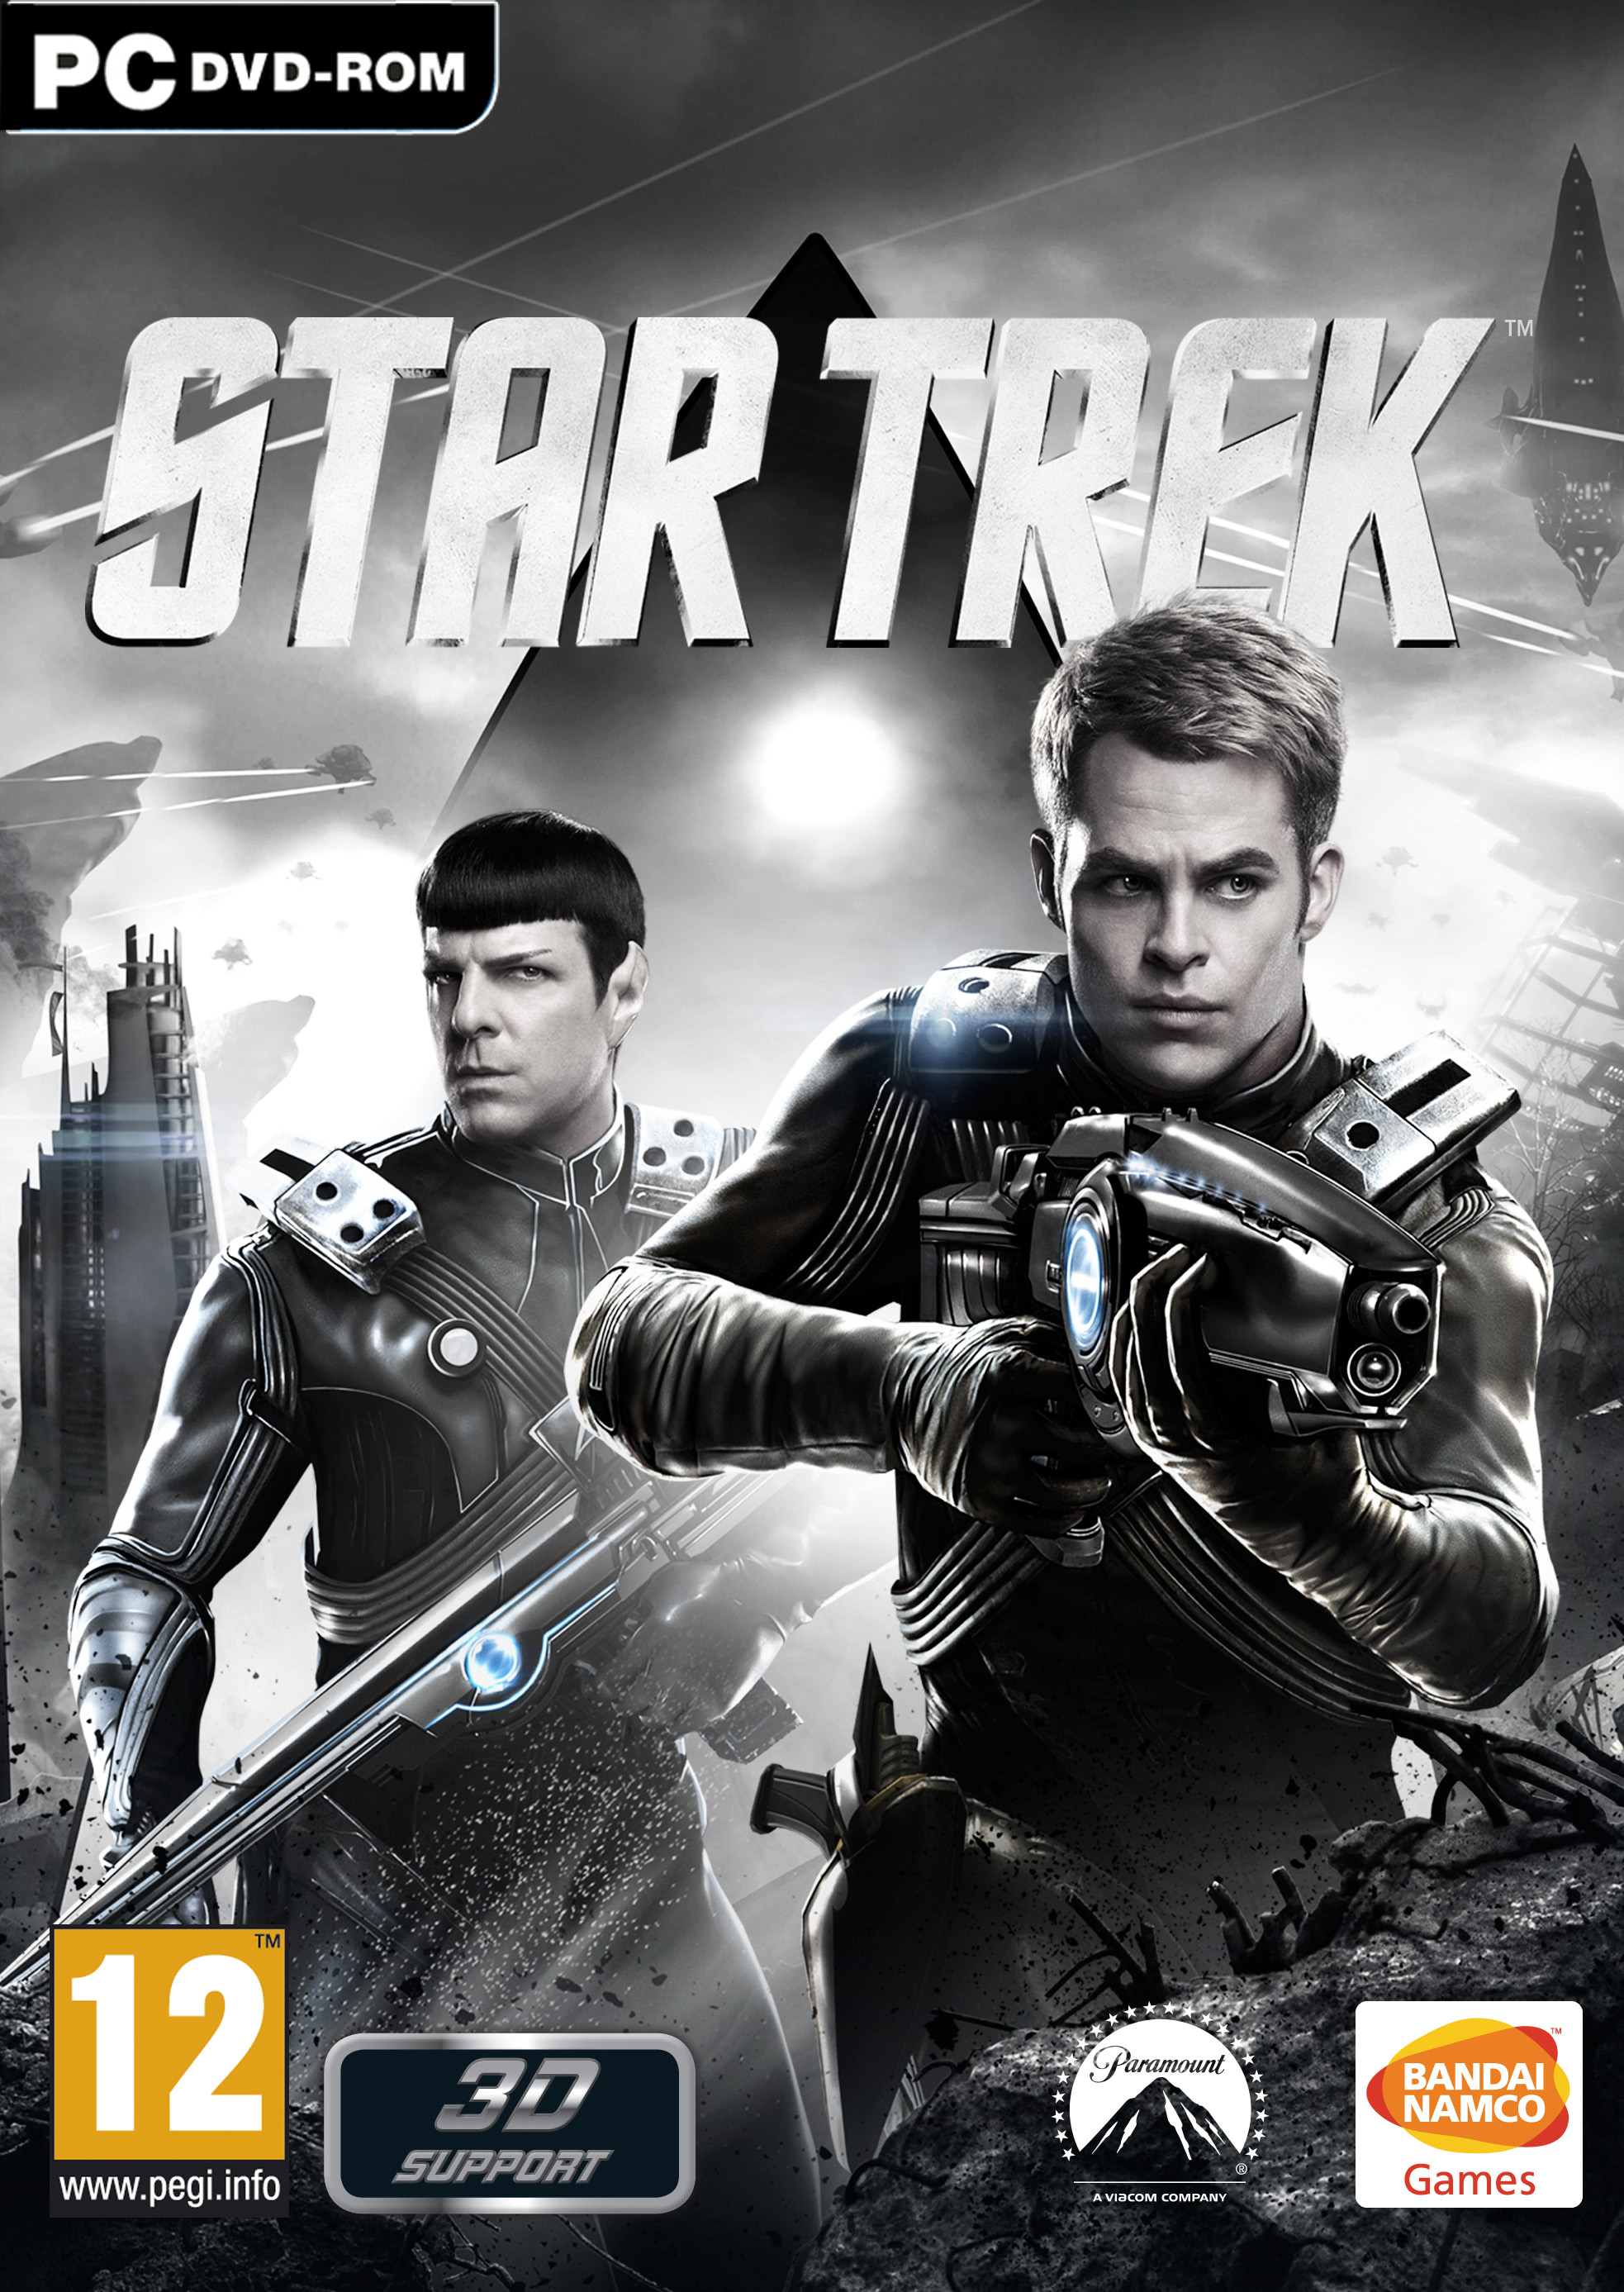 Star-Trek-2013-Video-Game-Cover-Chris-Pine-and-Zachary-Quinto.jpg